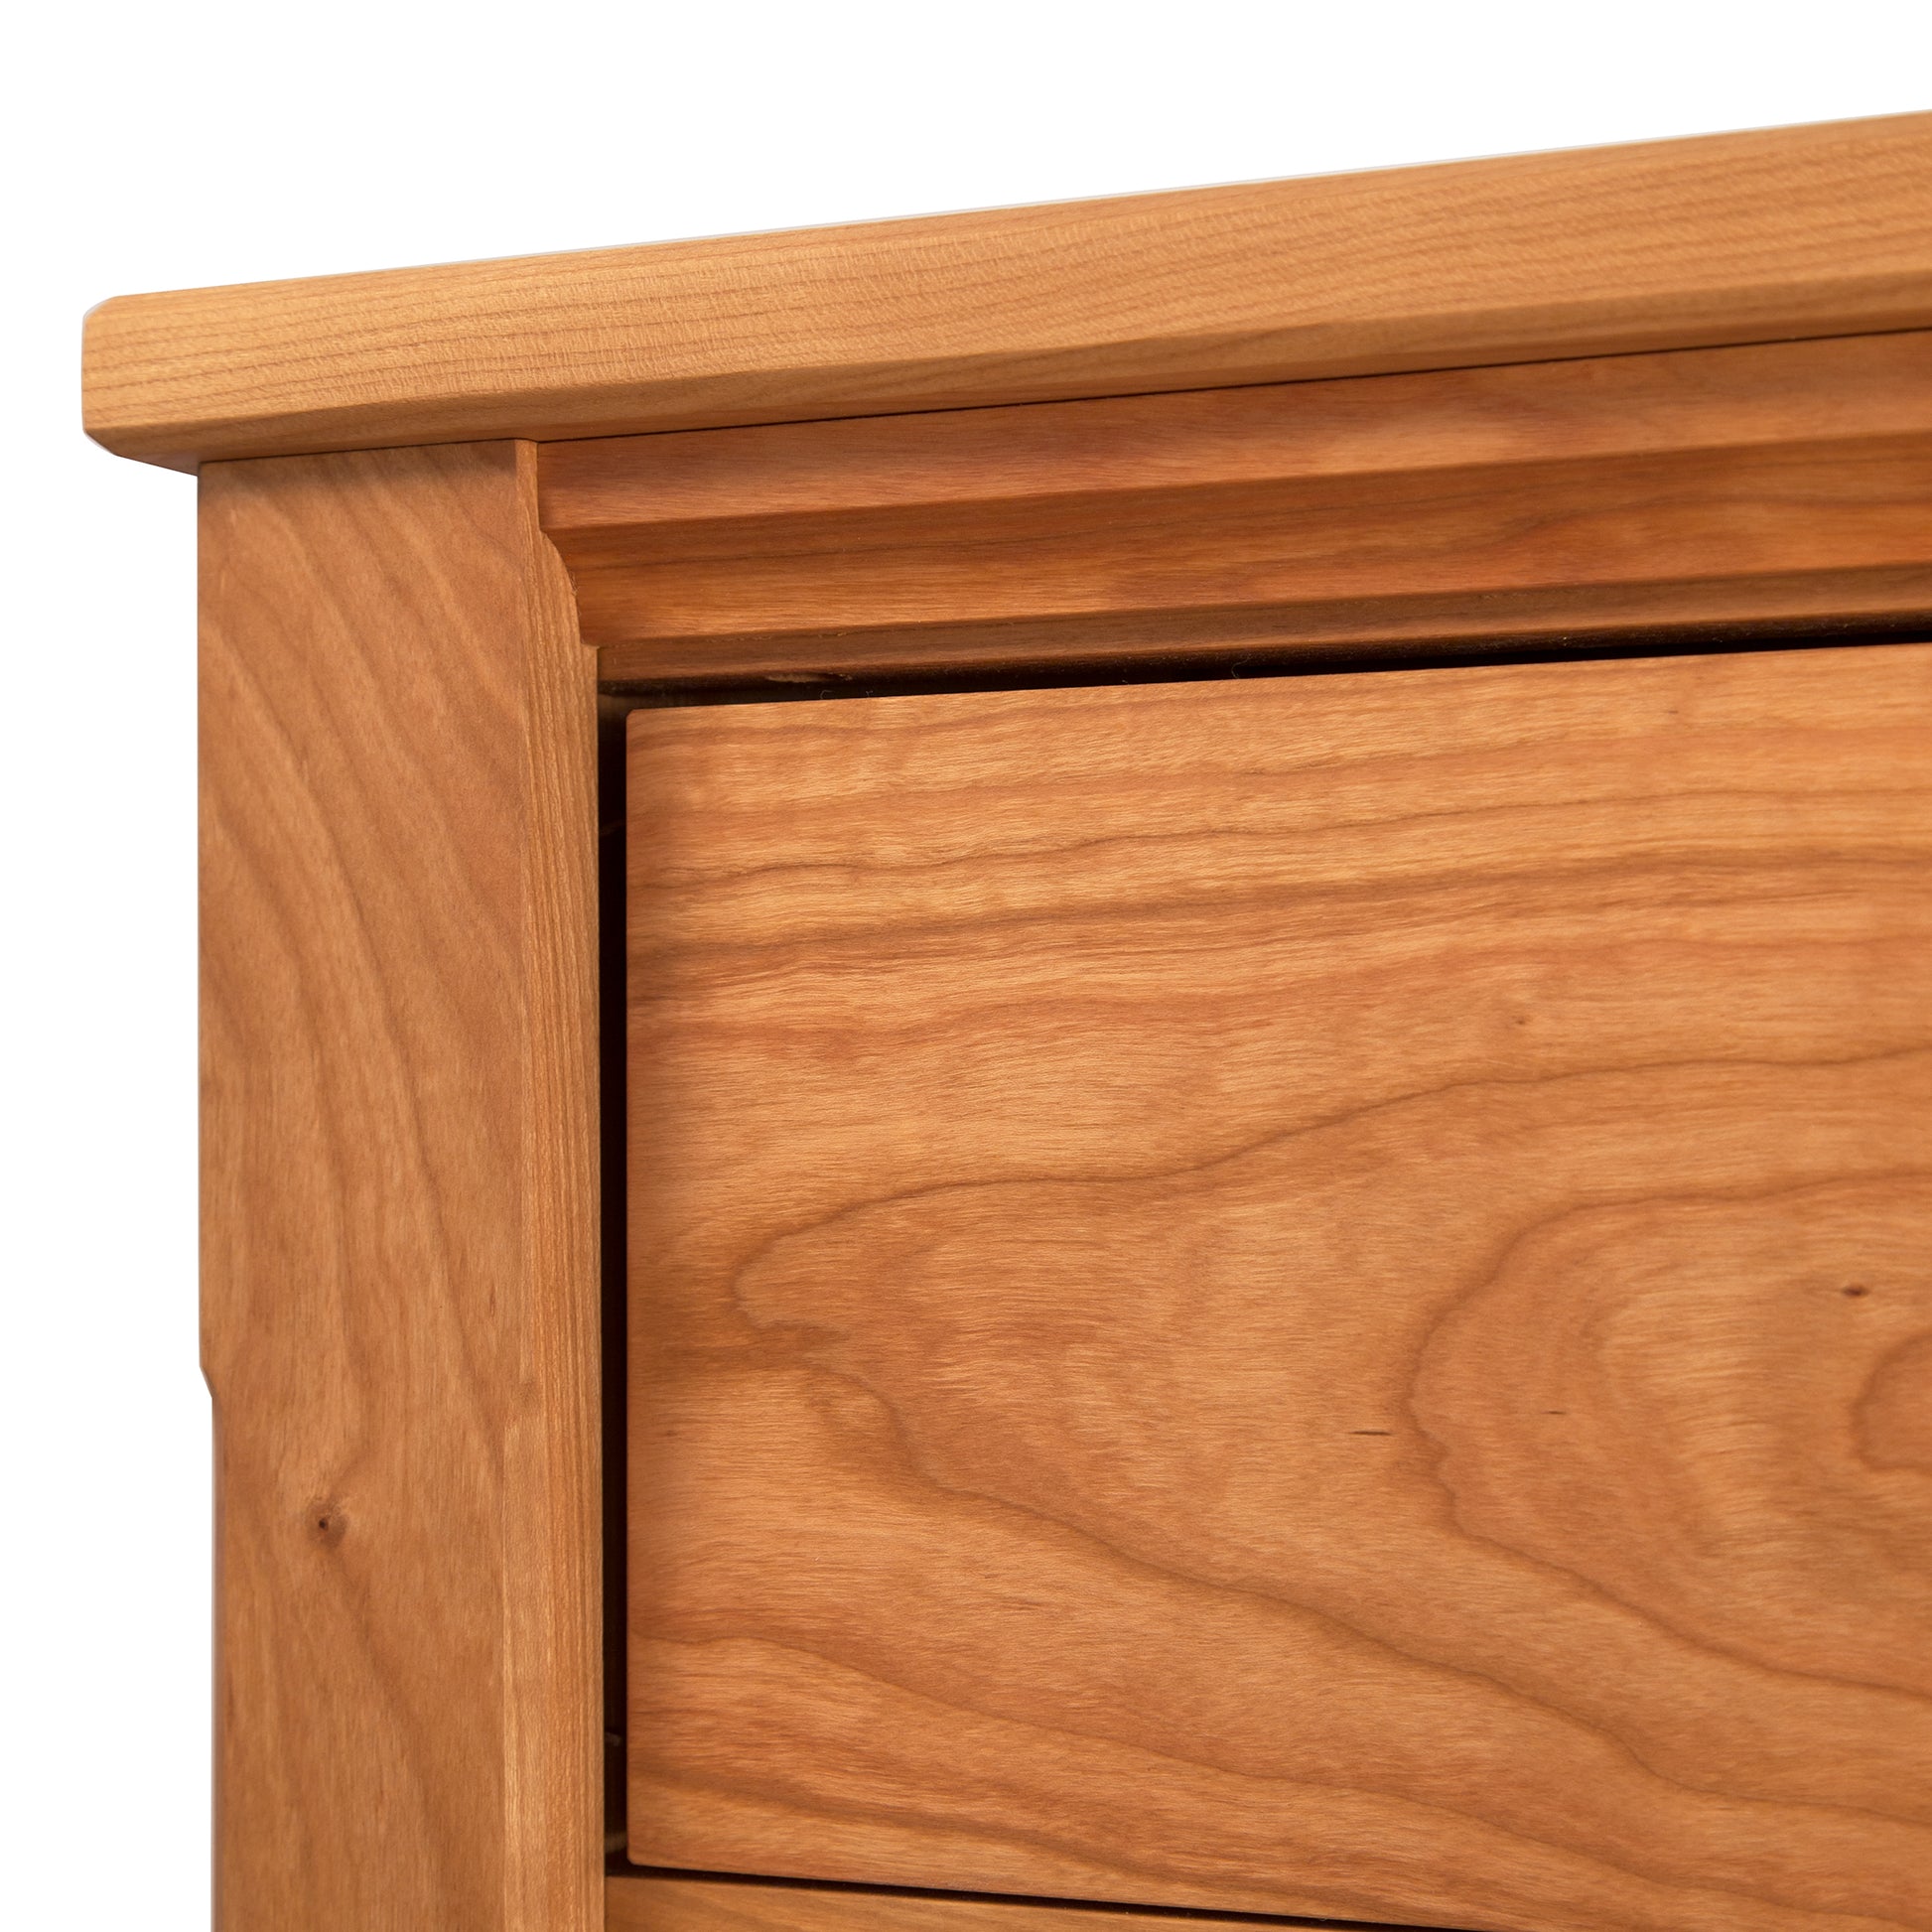 Close-up of a Maple Corner Woodworks Vermont Shaker Extra Wide Chest corner showing detailed wood grain texture and joinery craftsmanship on a light background.